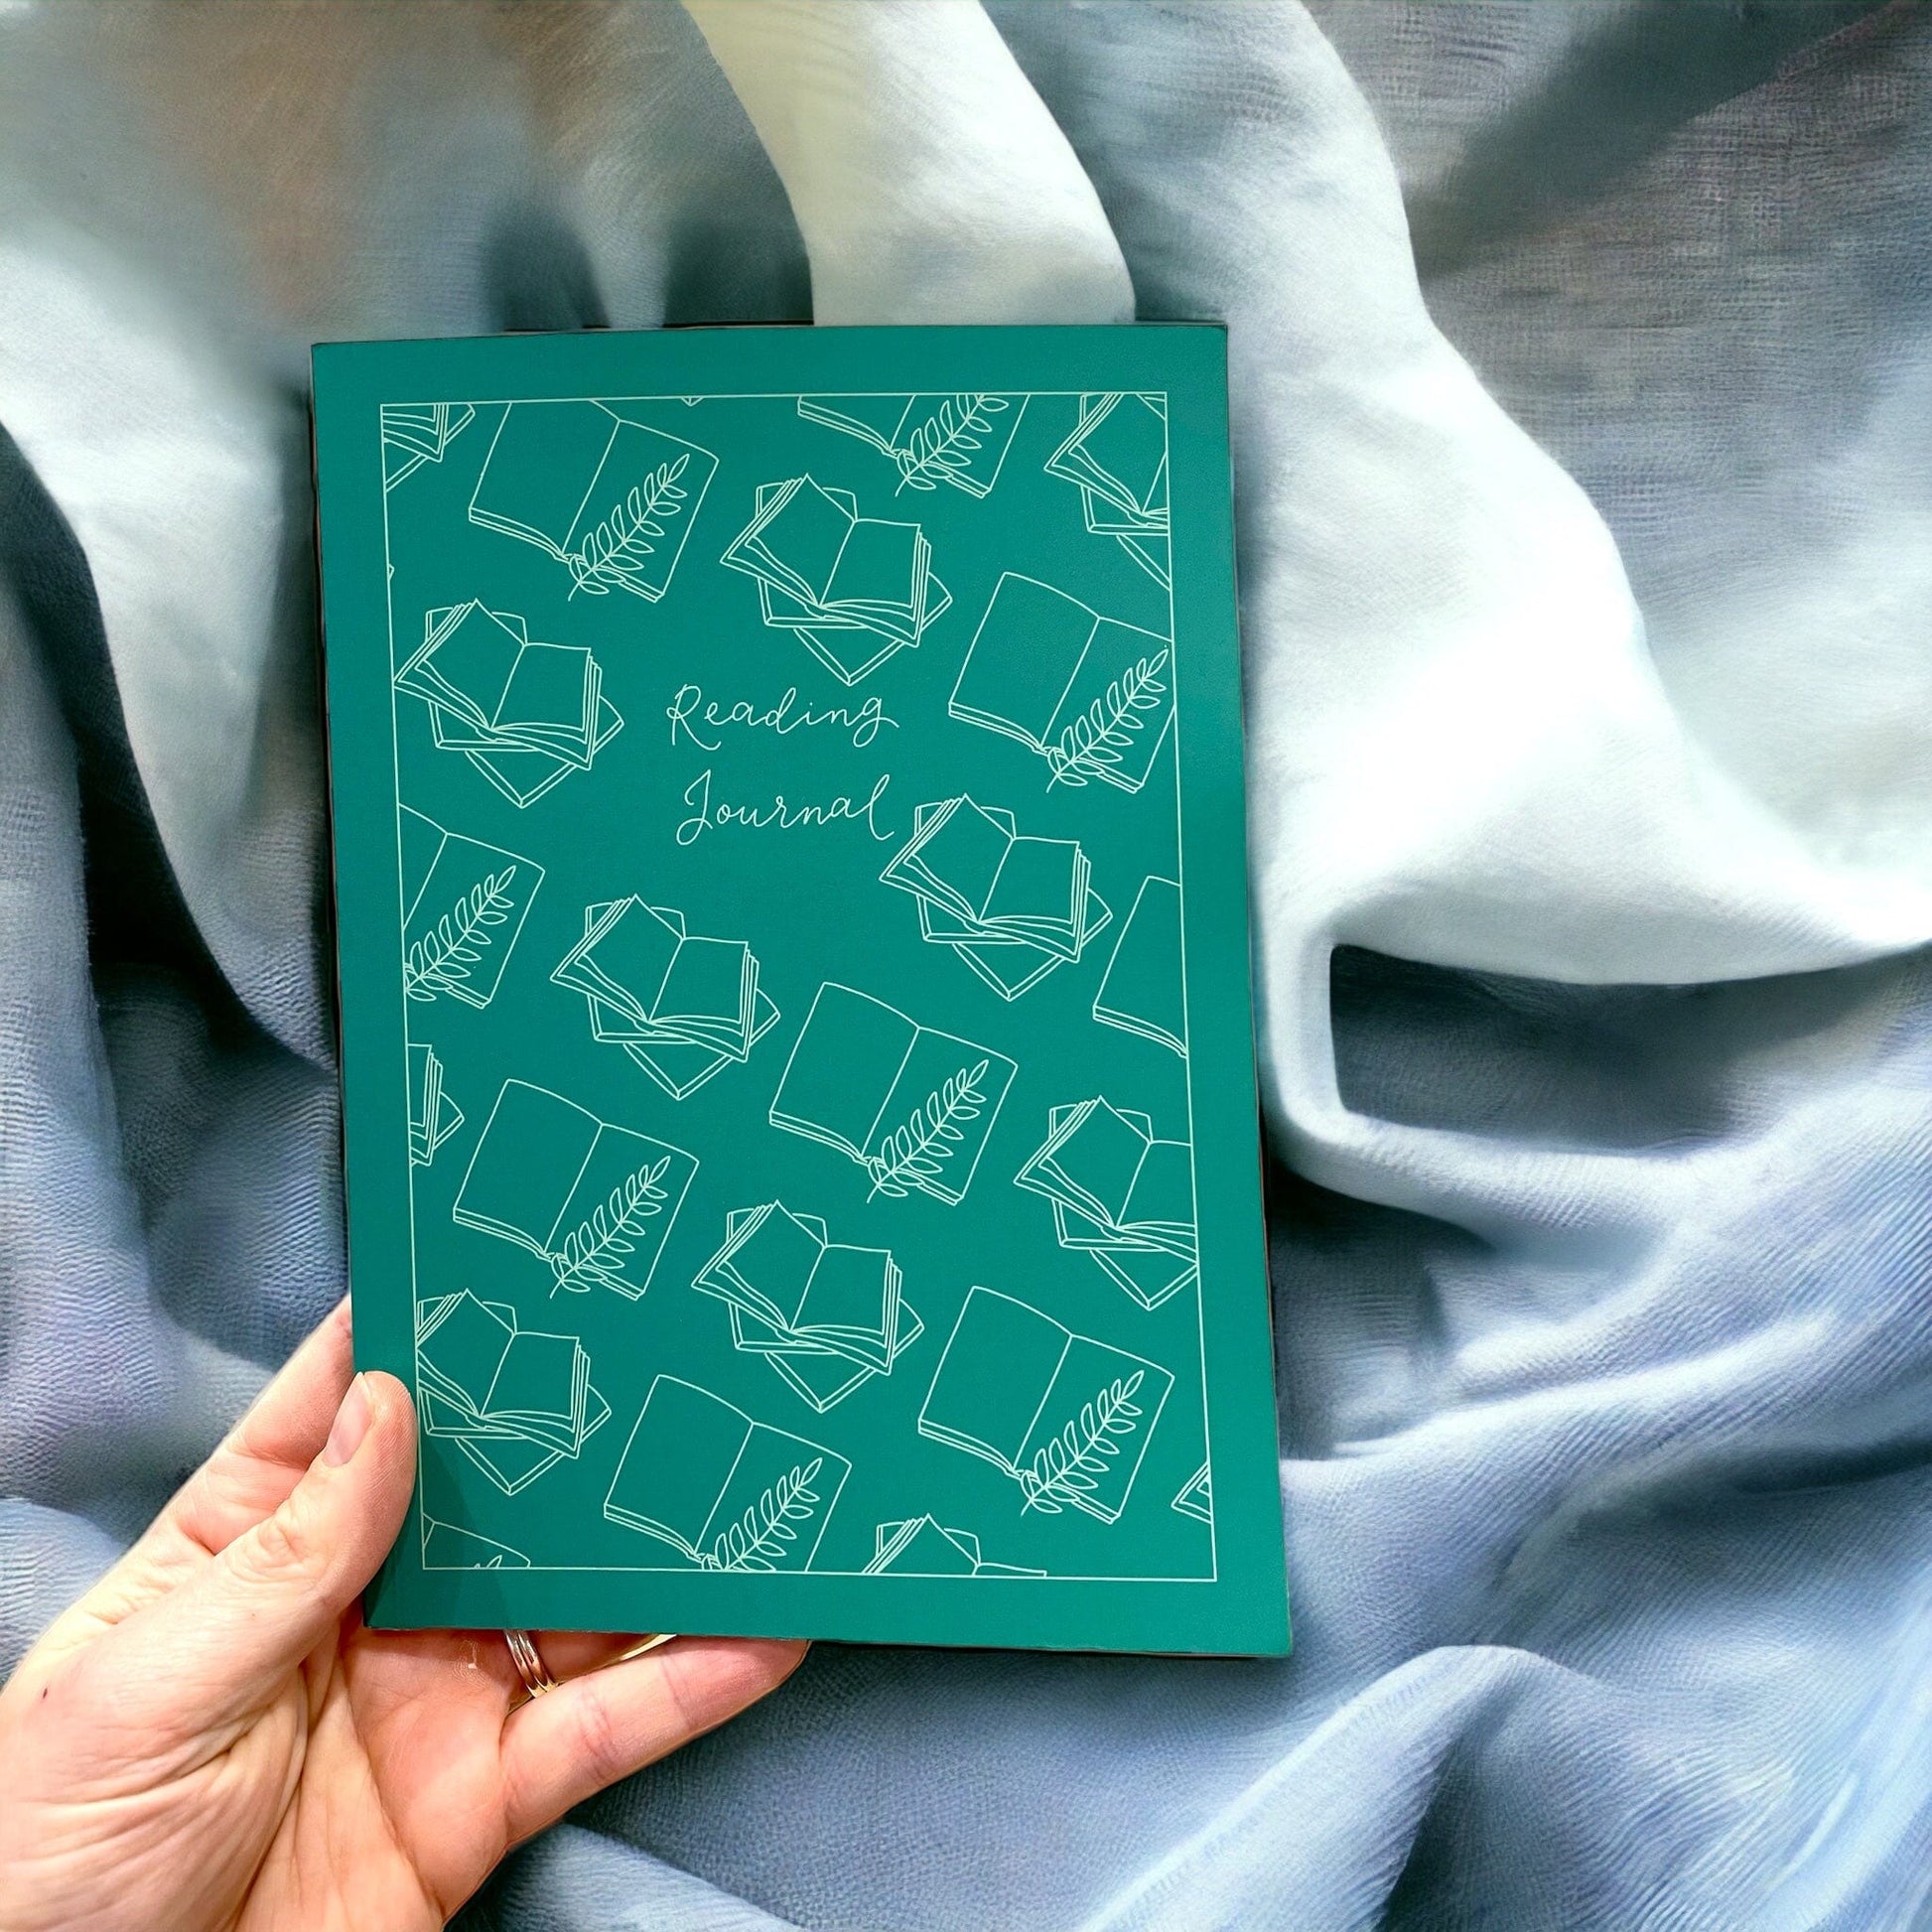 And Hope Designs Notebook Teal Green Reading journal